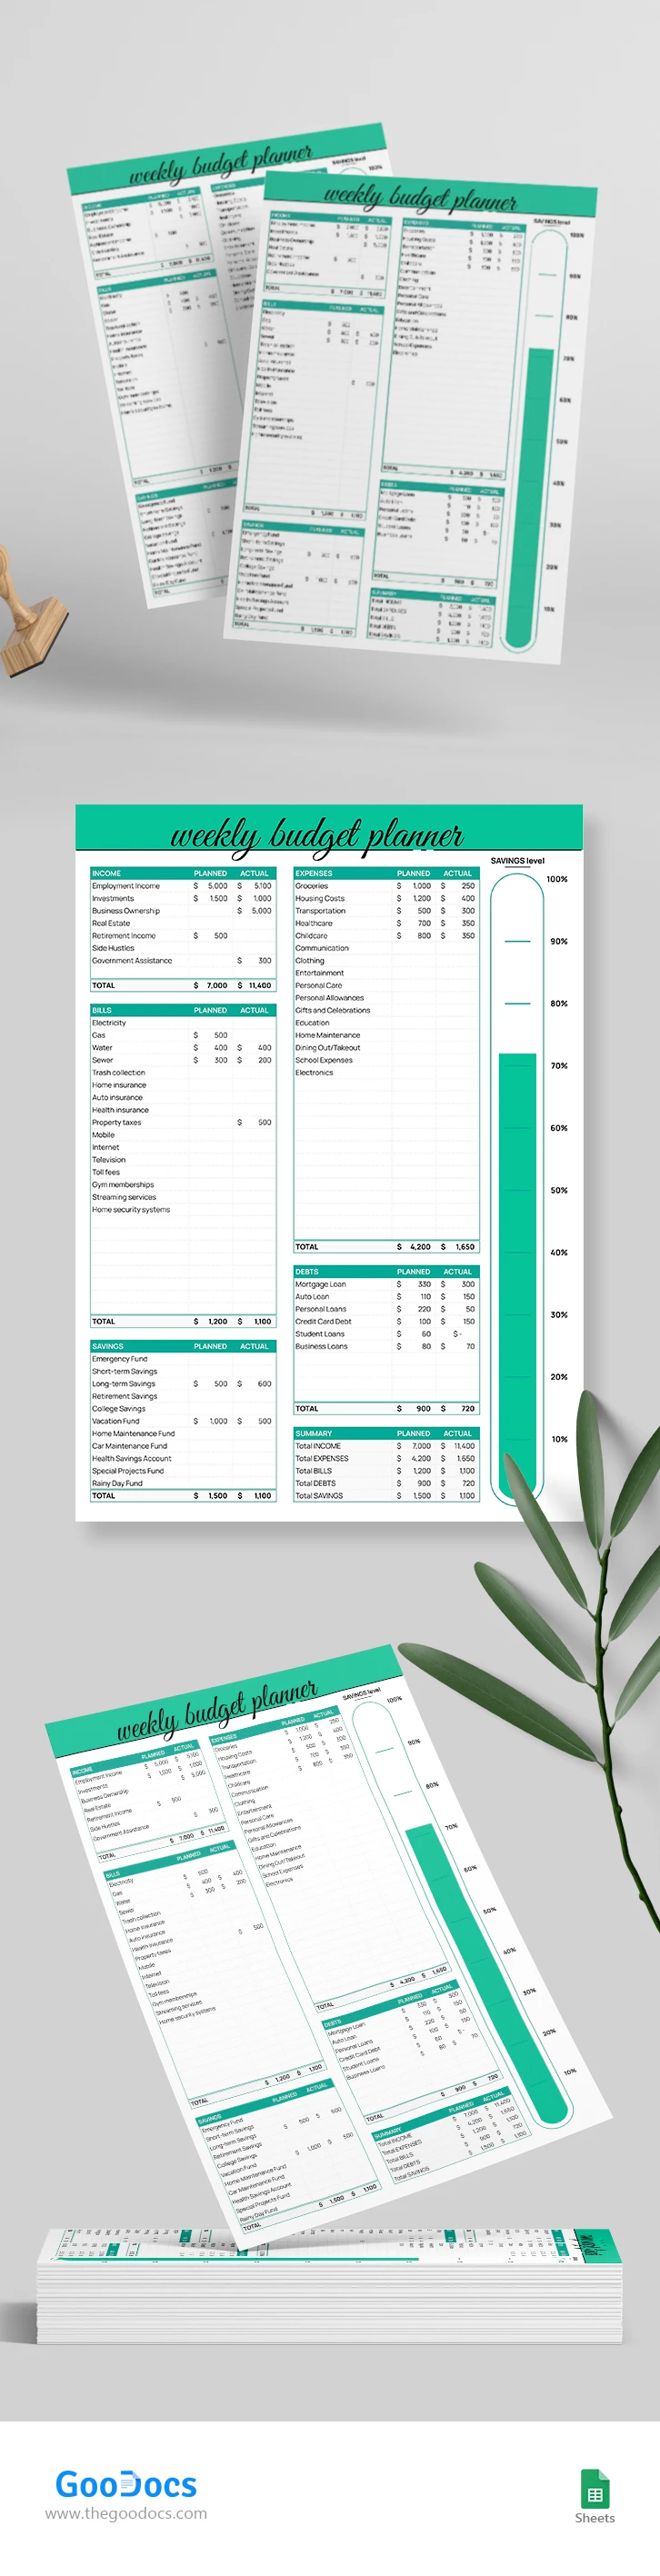 Professional Weekly Budget Planner - free Google Docs Template - 10068454